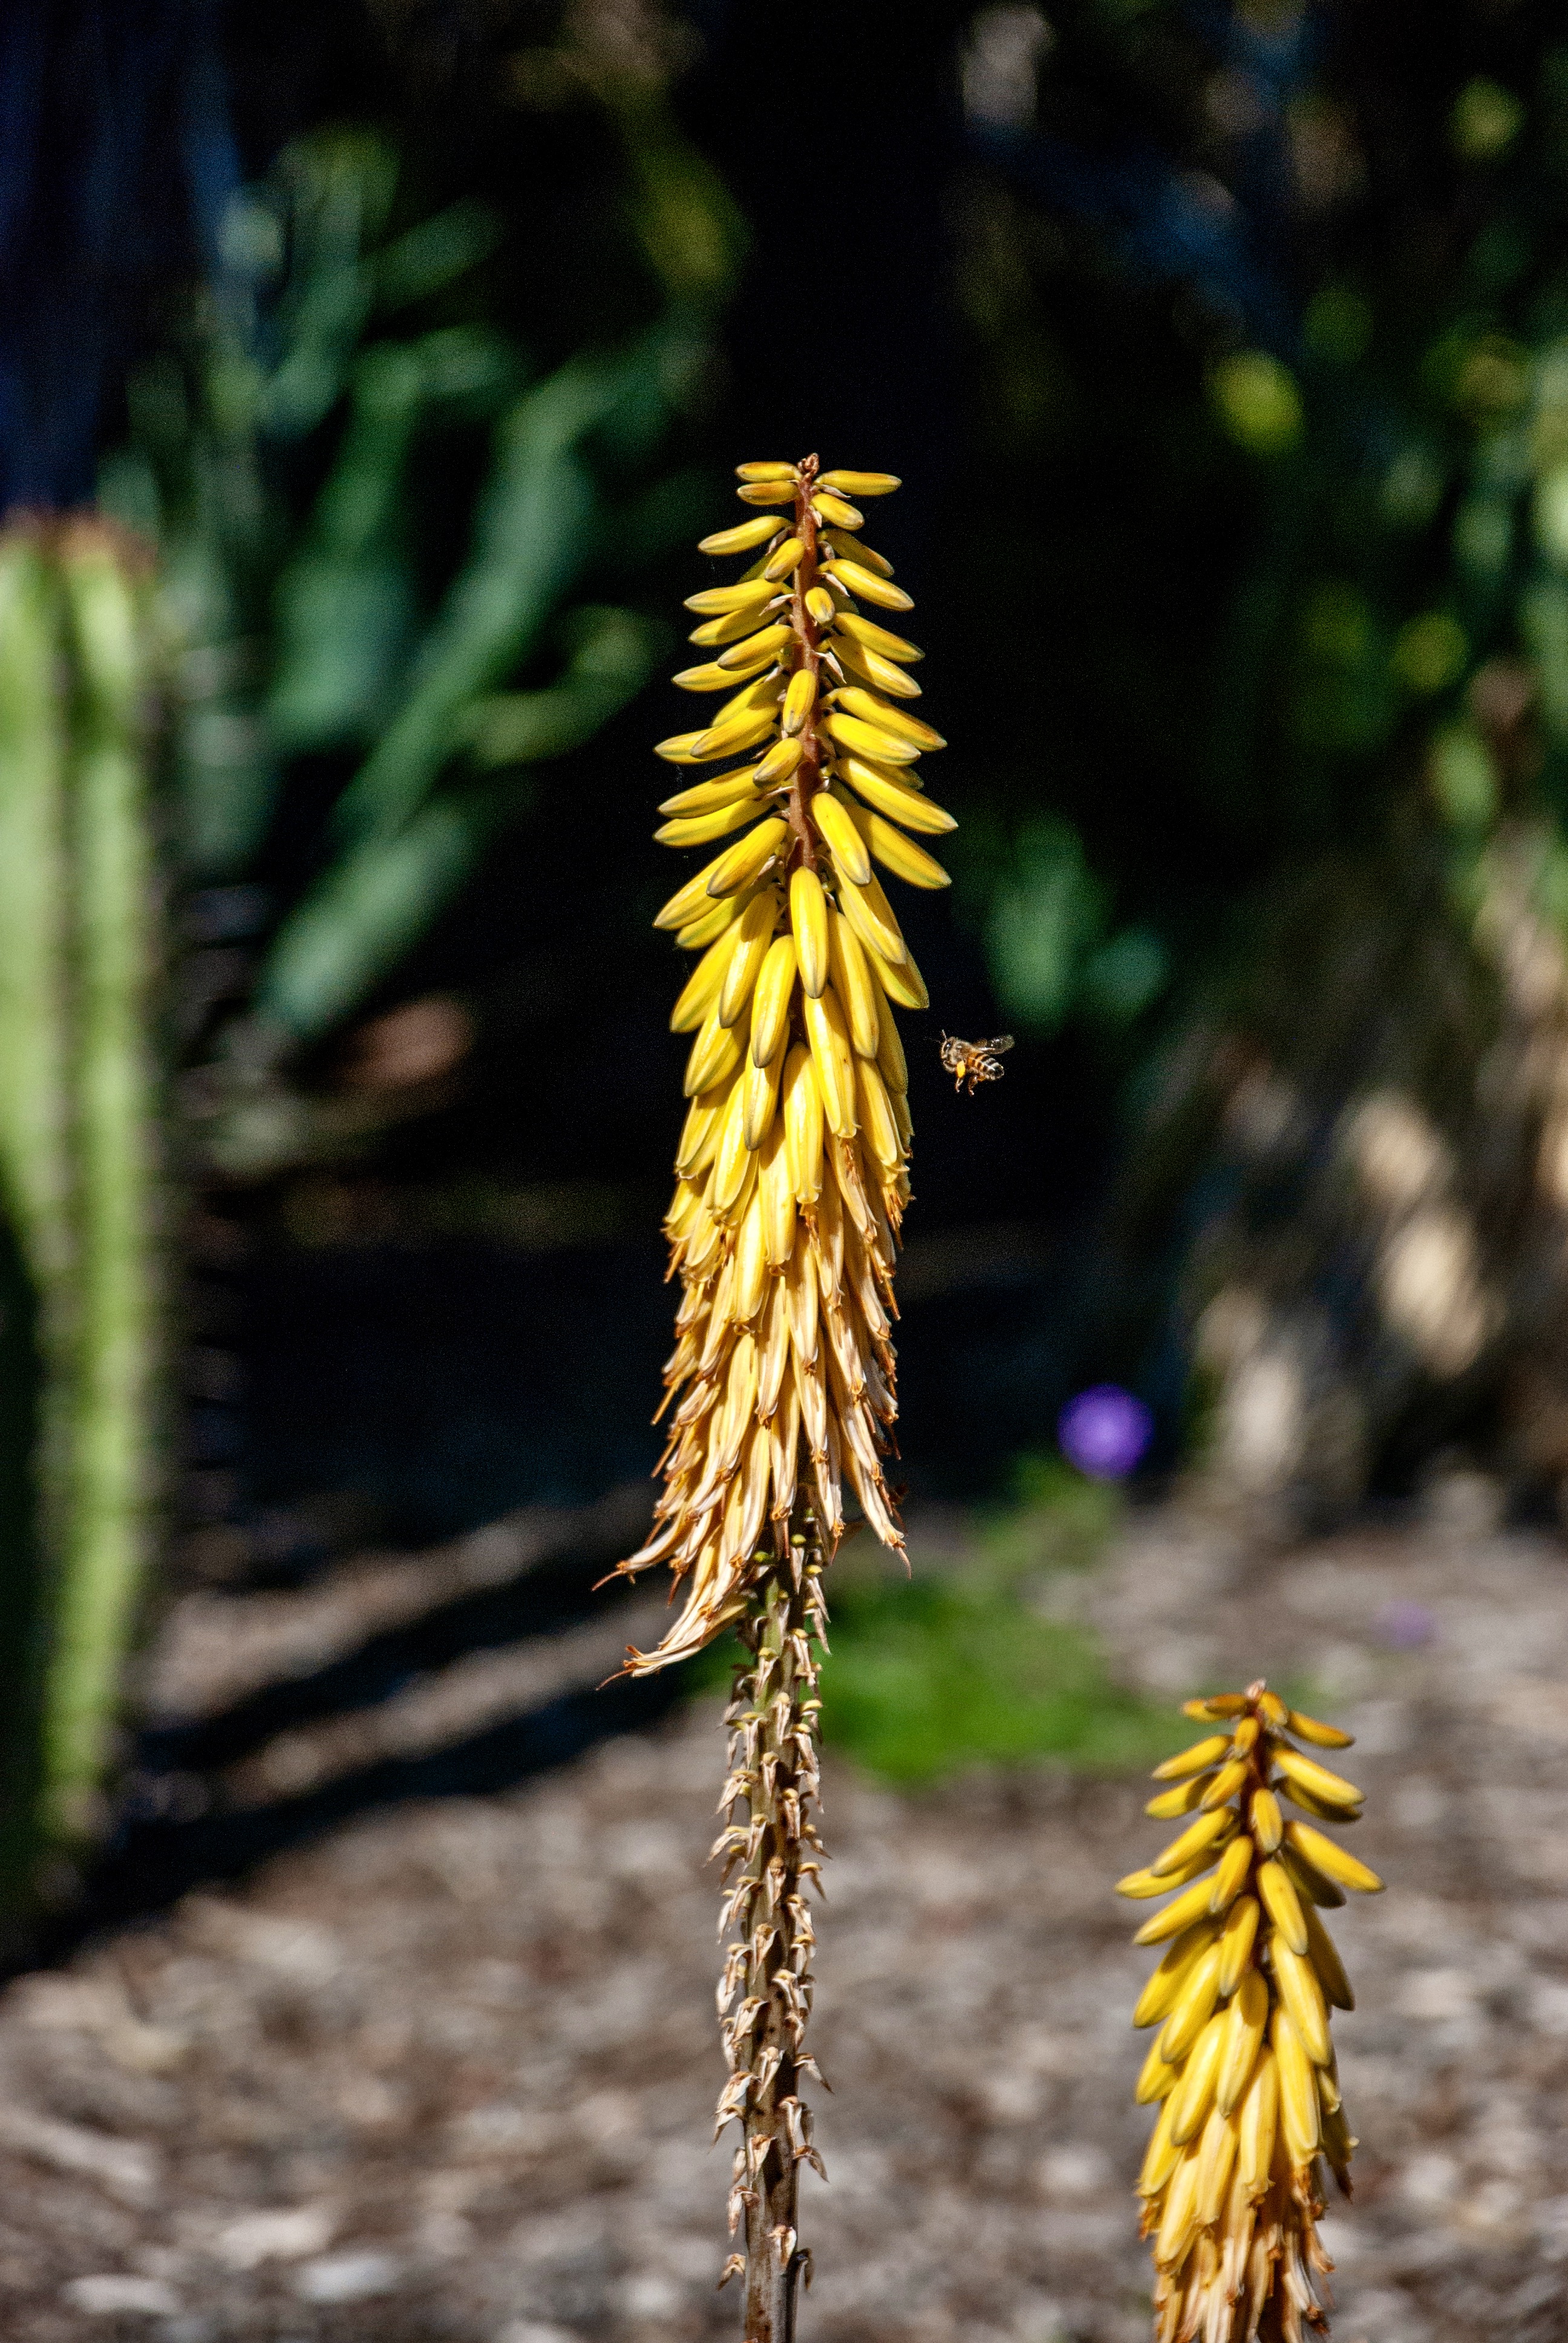 The bright yellow inflorescence of an aloe vera plant with a yellow bee flying toward it.